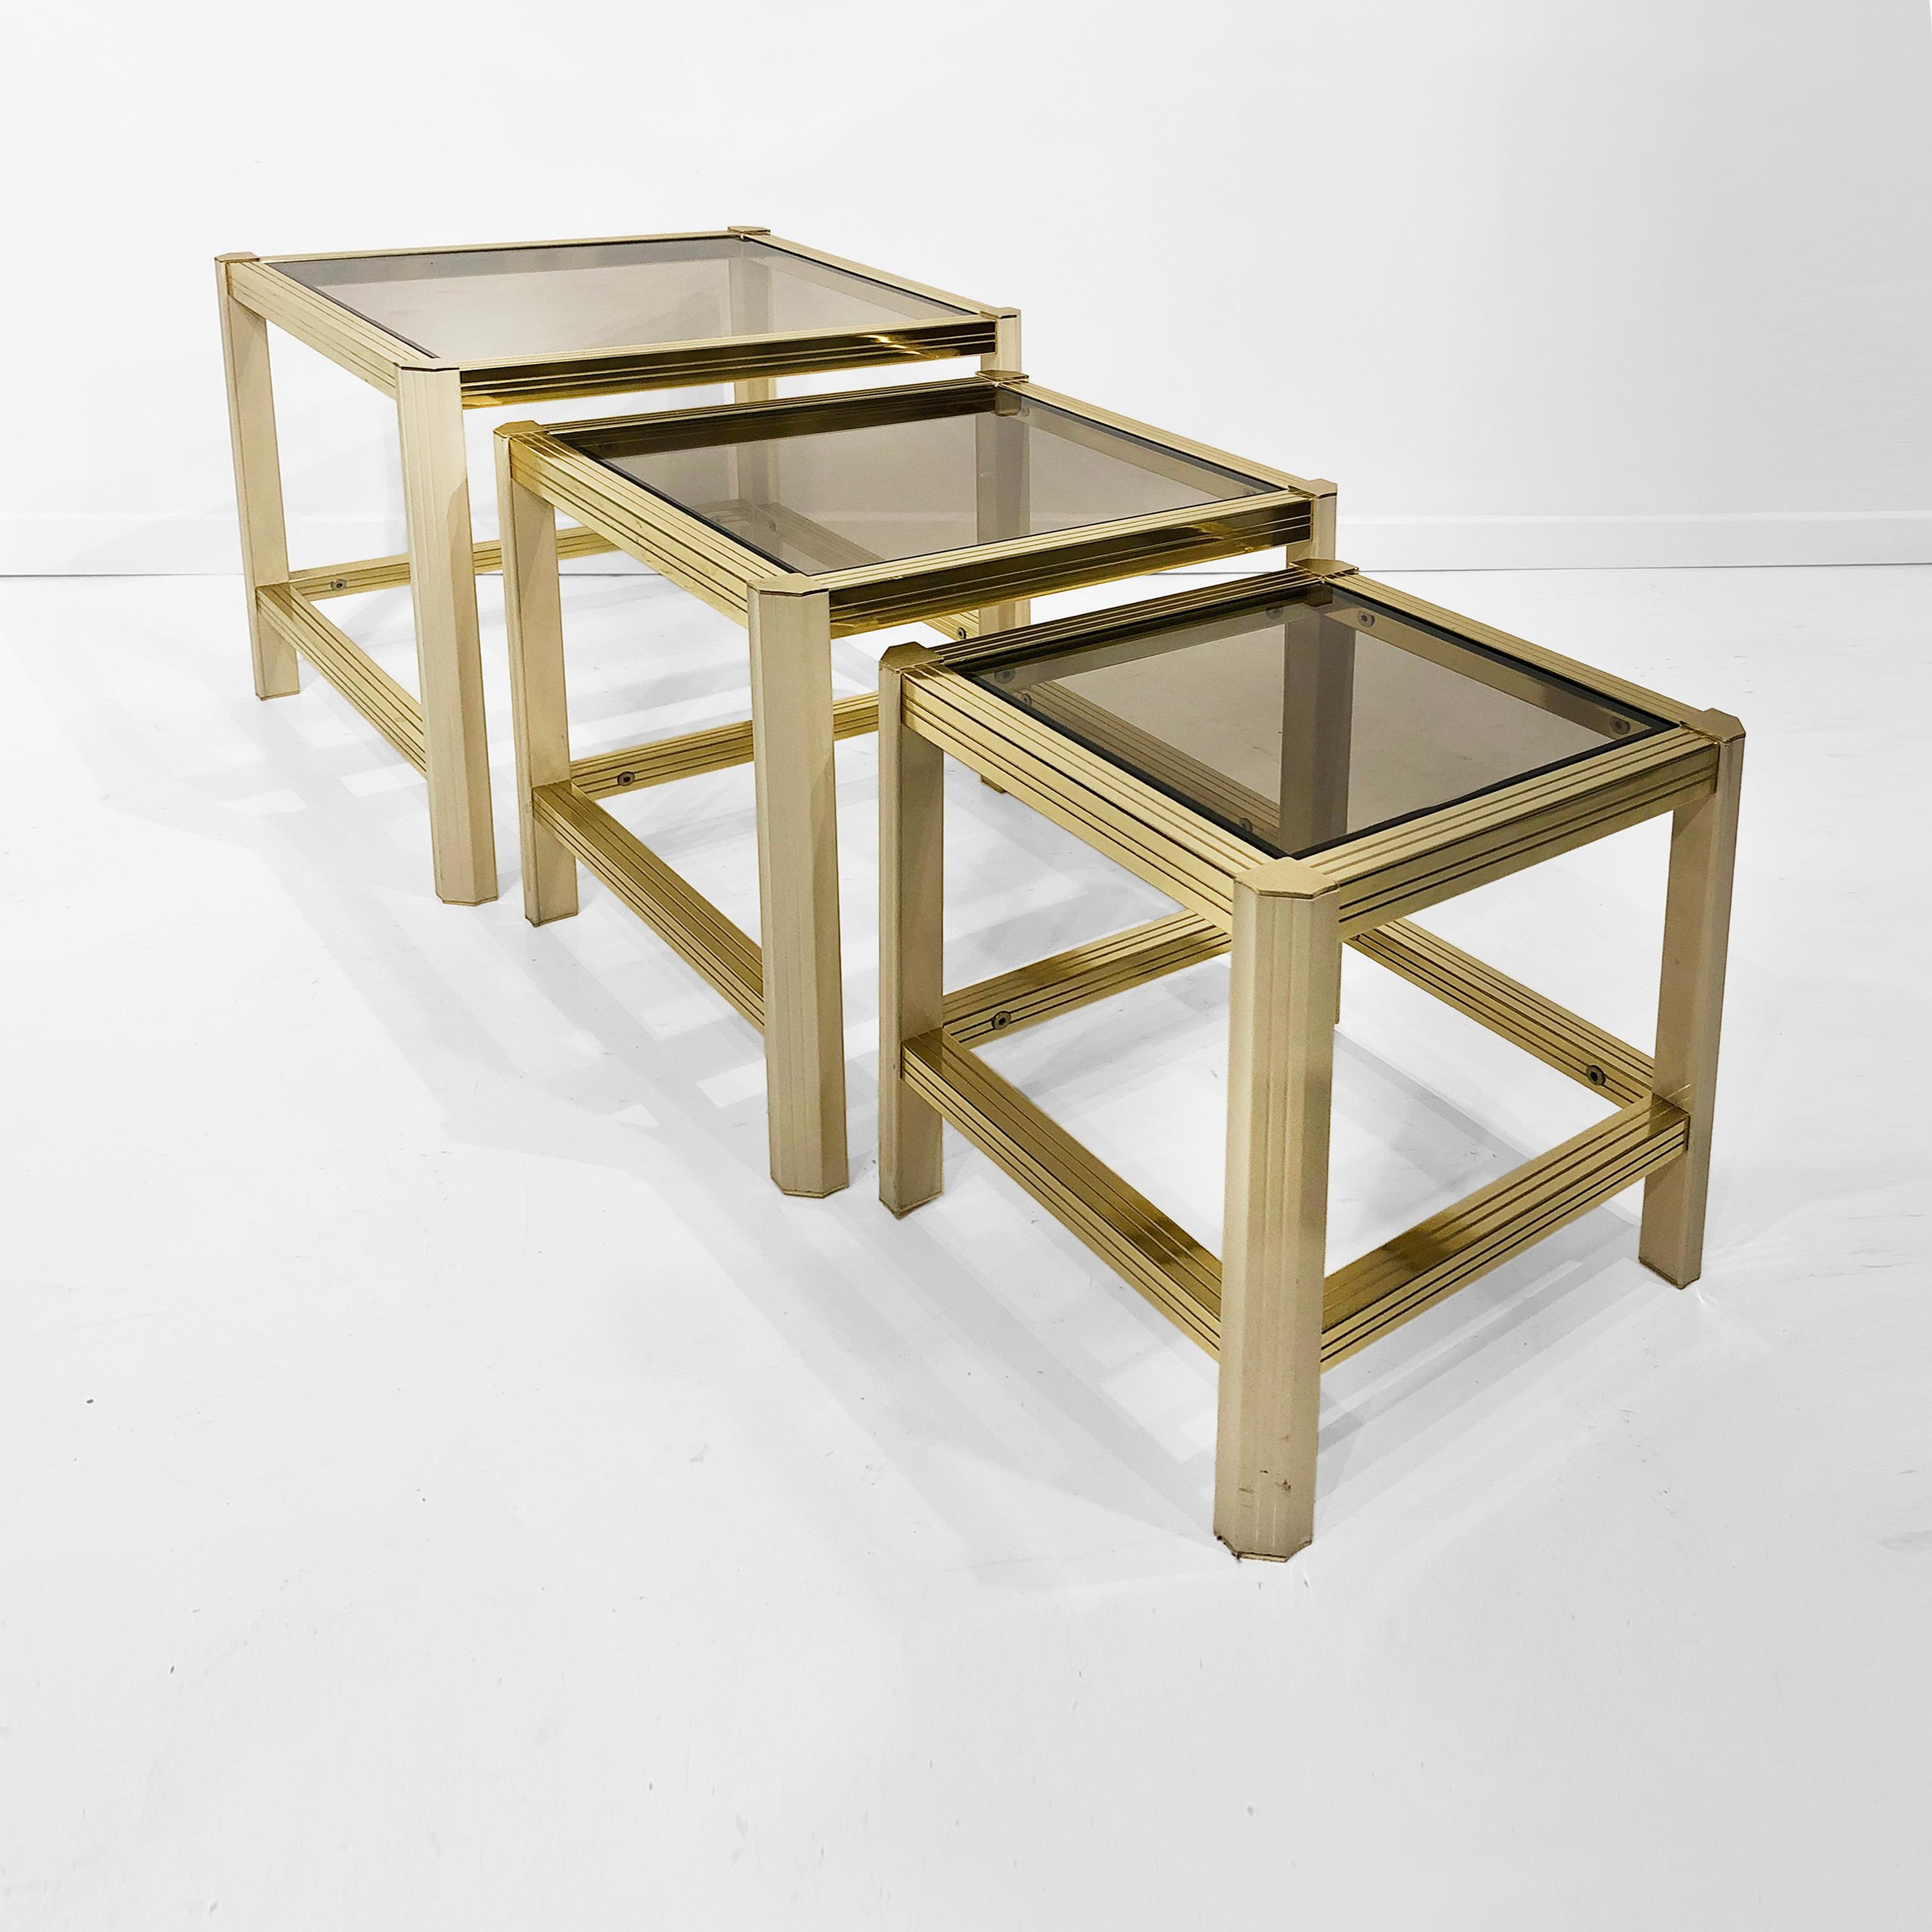 Late 20th Century French Brass Beige Nesting Tables 1970s Hollywood Regency Smoked Glass Side Sofa